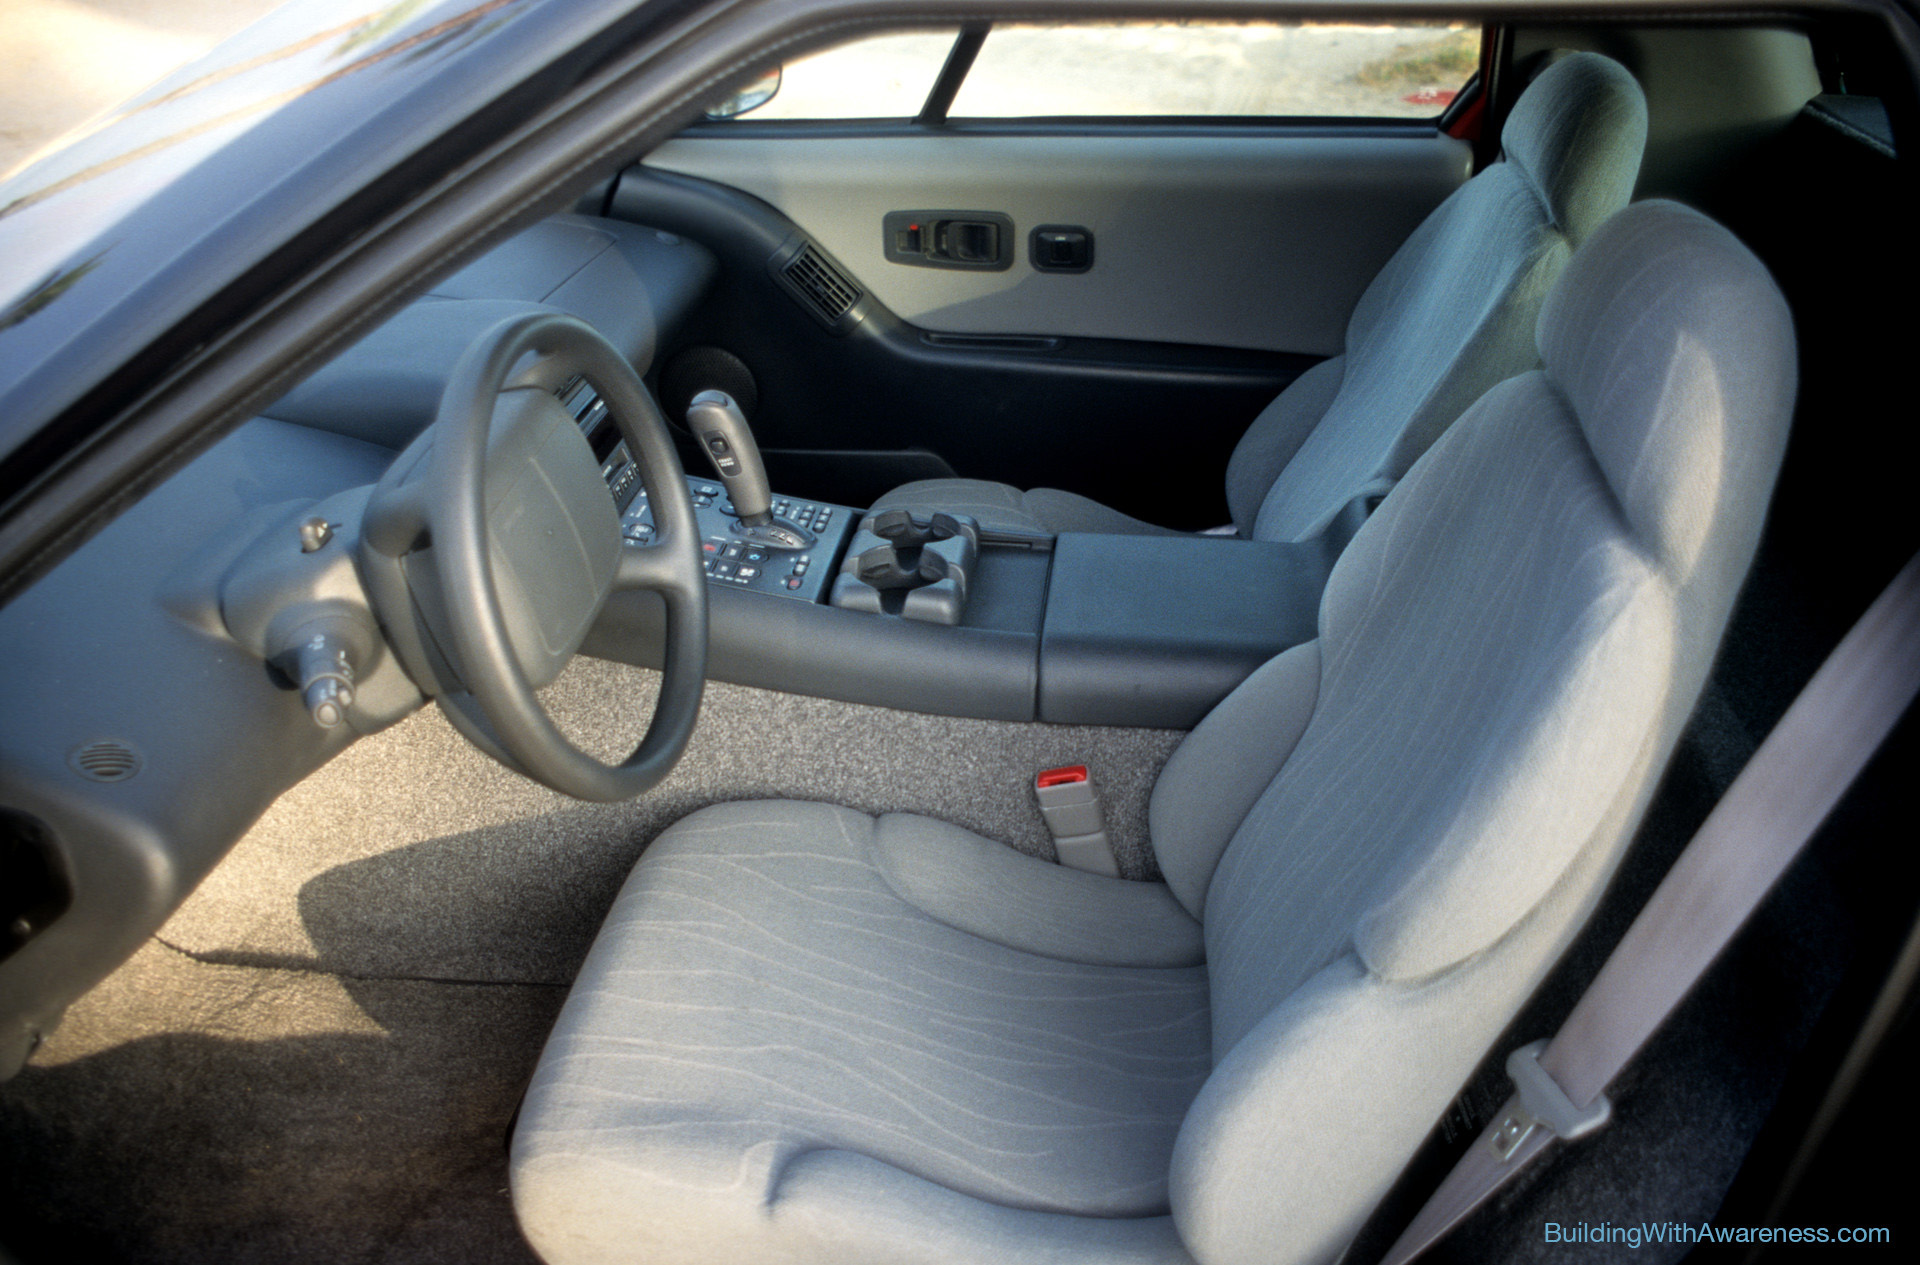 EV1 electric car interior view showing the two seats and the center console.